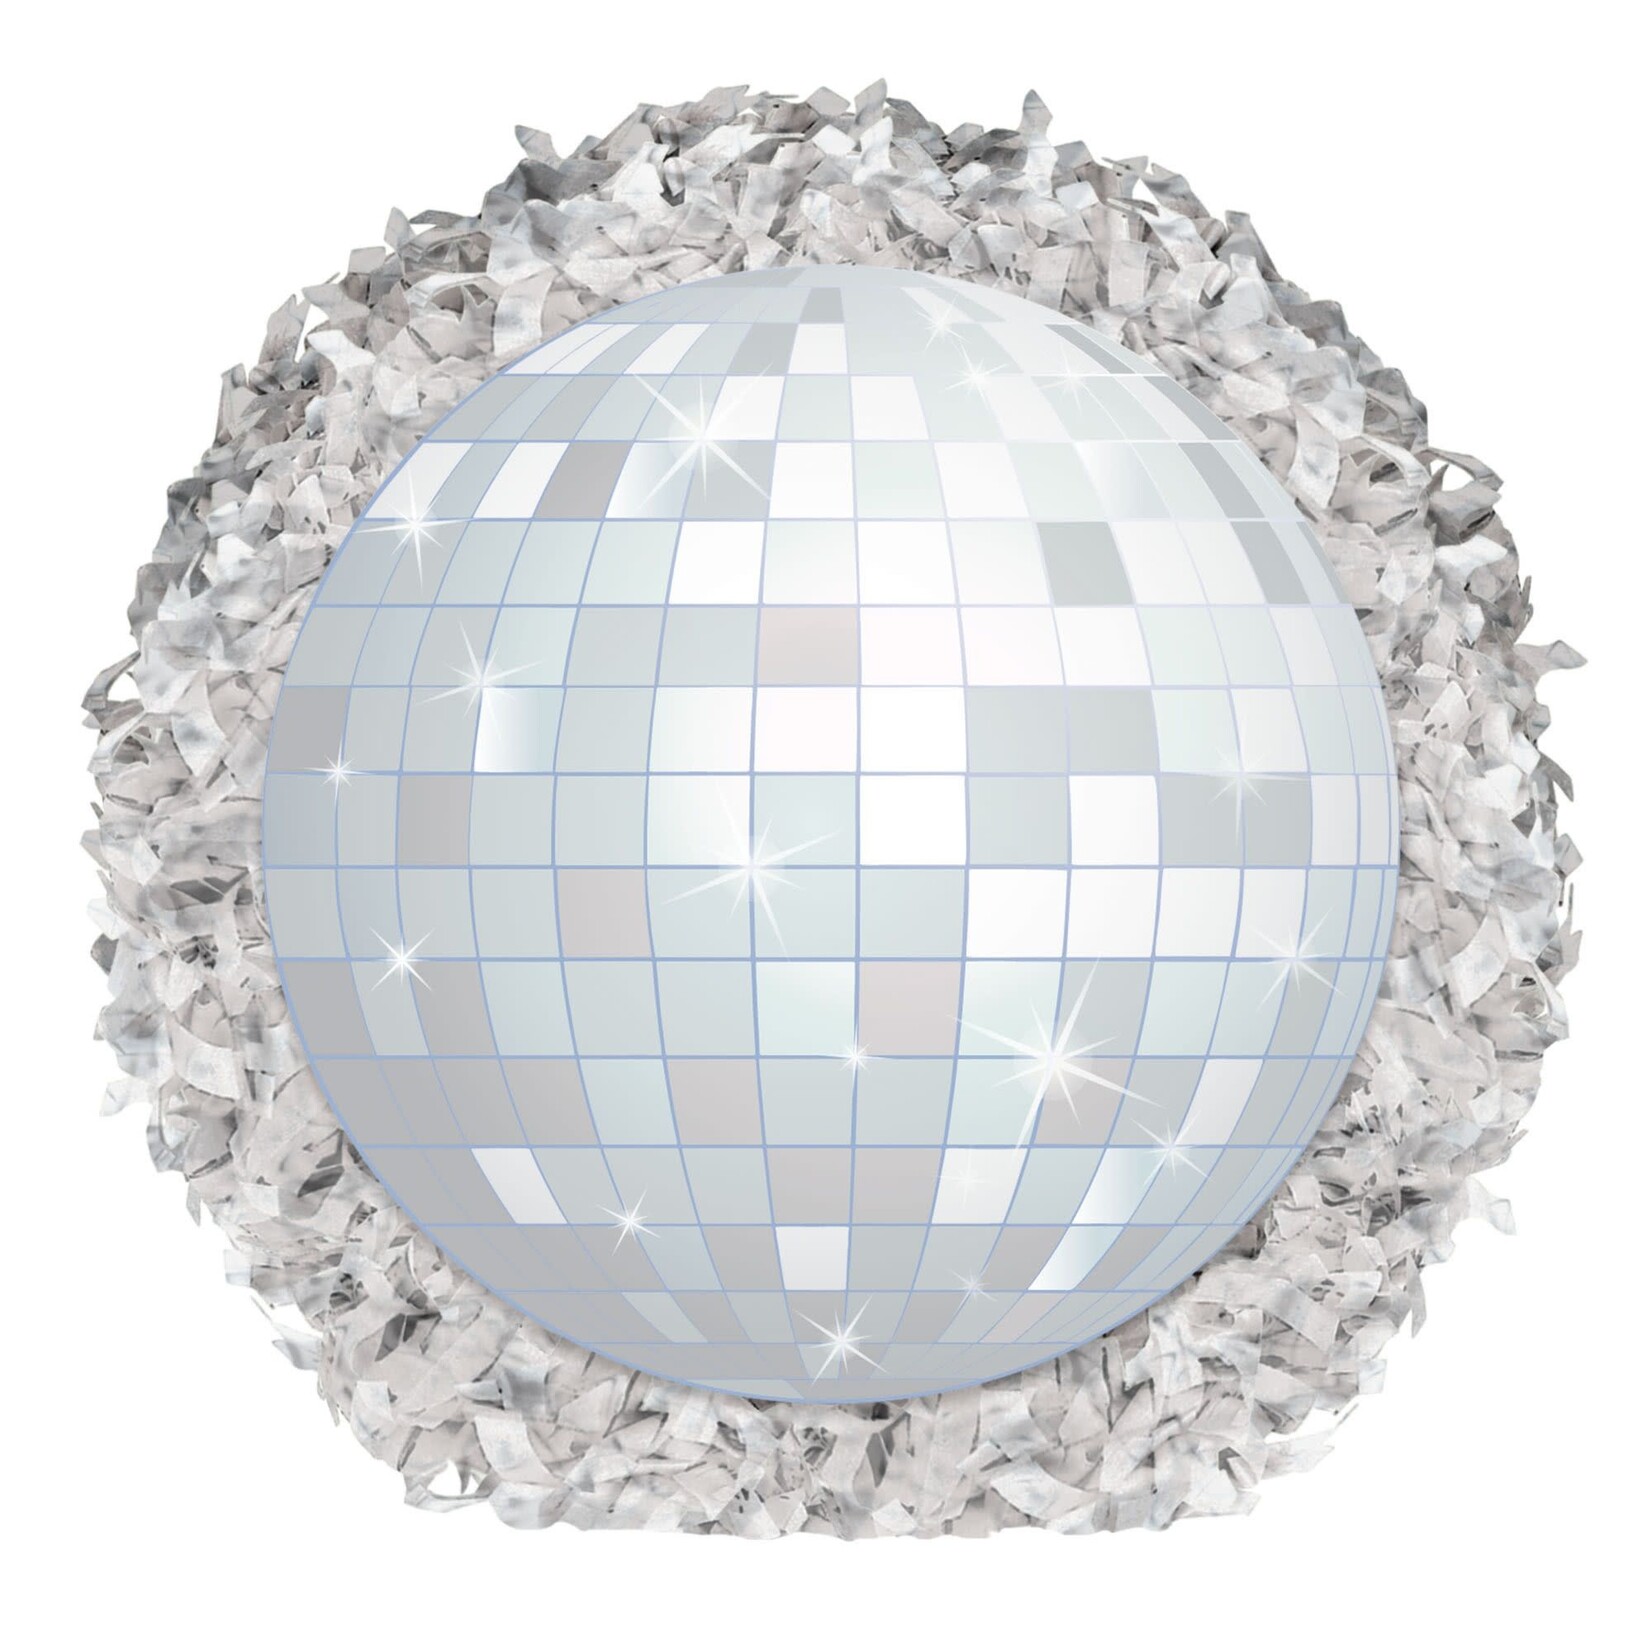 Mini Disco Ball Pinata - The Ultimate Party and Rental Store